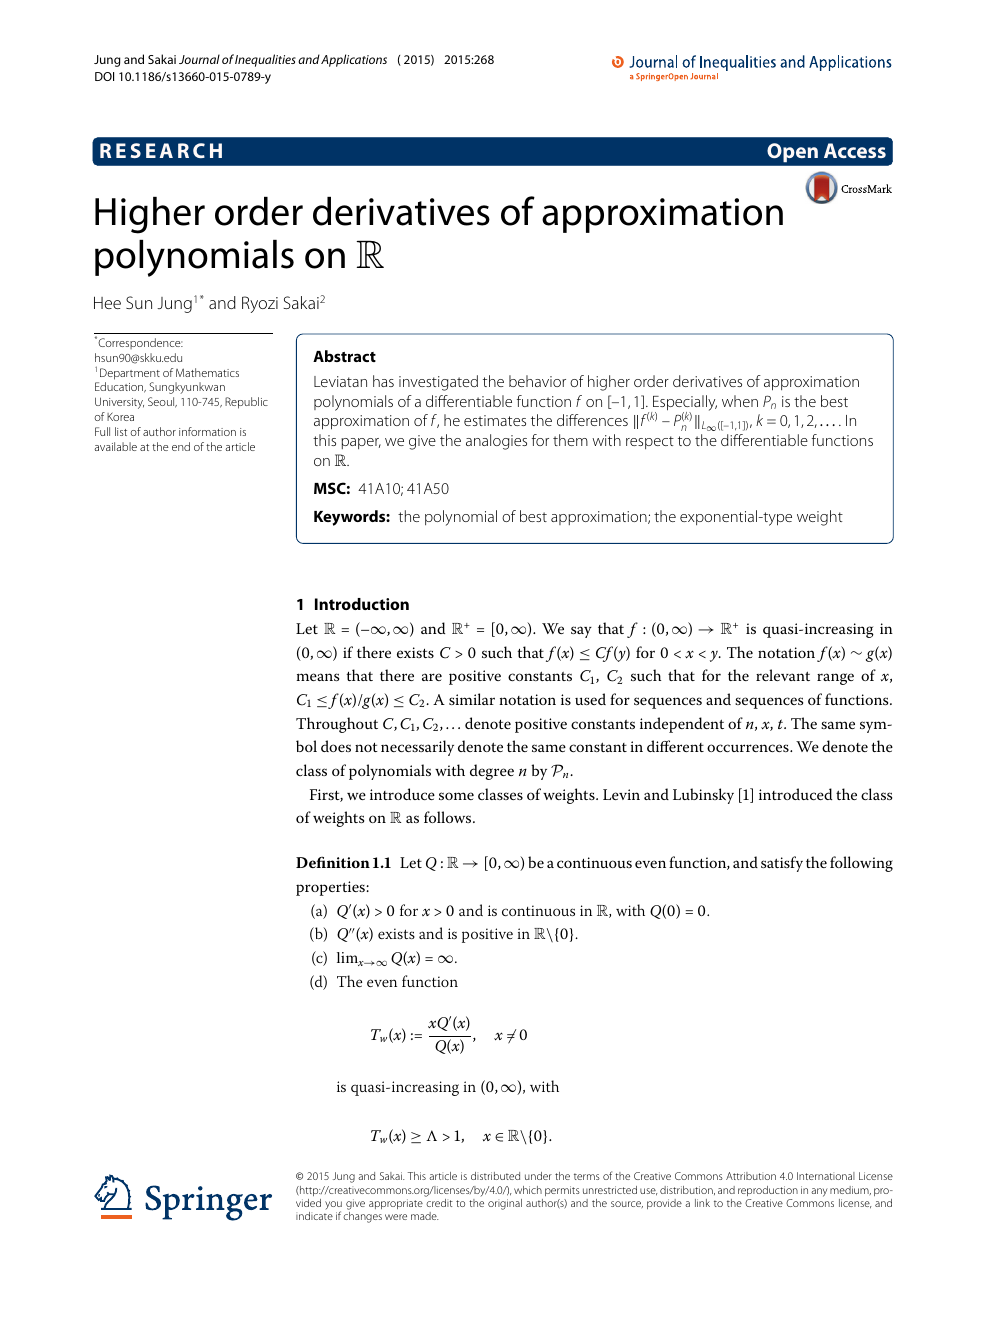 Higher Order Derivatives Of Approximation Polynomials On R Mathbb R Topic Of Research Paper In Mathematics Download Scholarly Article Pdf And Read For Free On Cyberleninka Open Science Hub